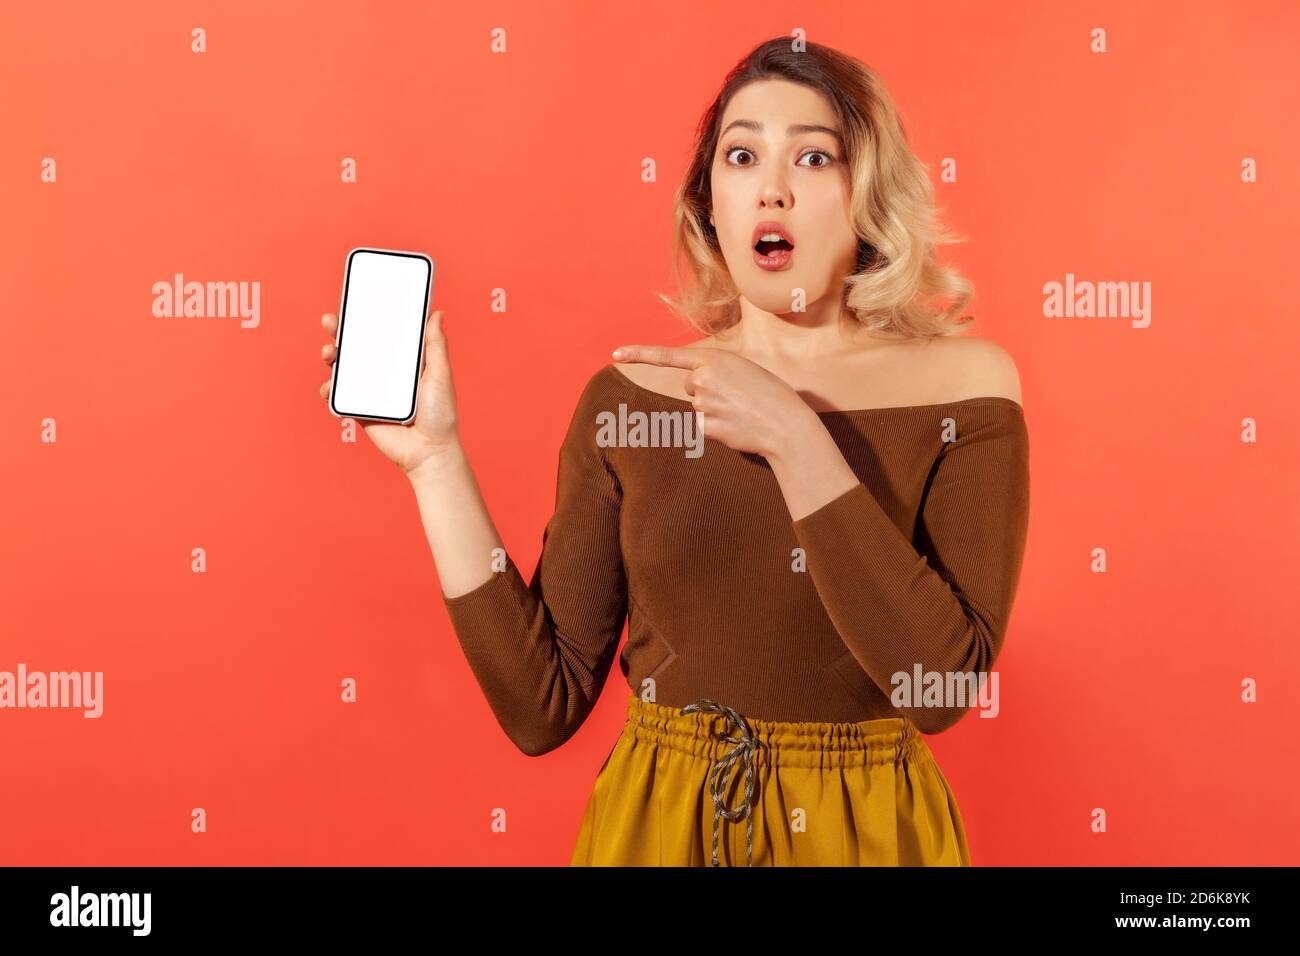 Shocked surprised woman pointing finger at smartphone with white empty screen, looking with amazed expression, online app. Indoor studio shot isolated Stock Photo